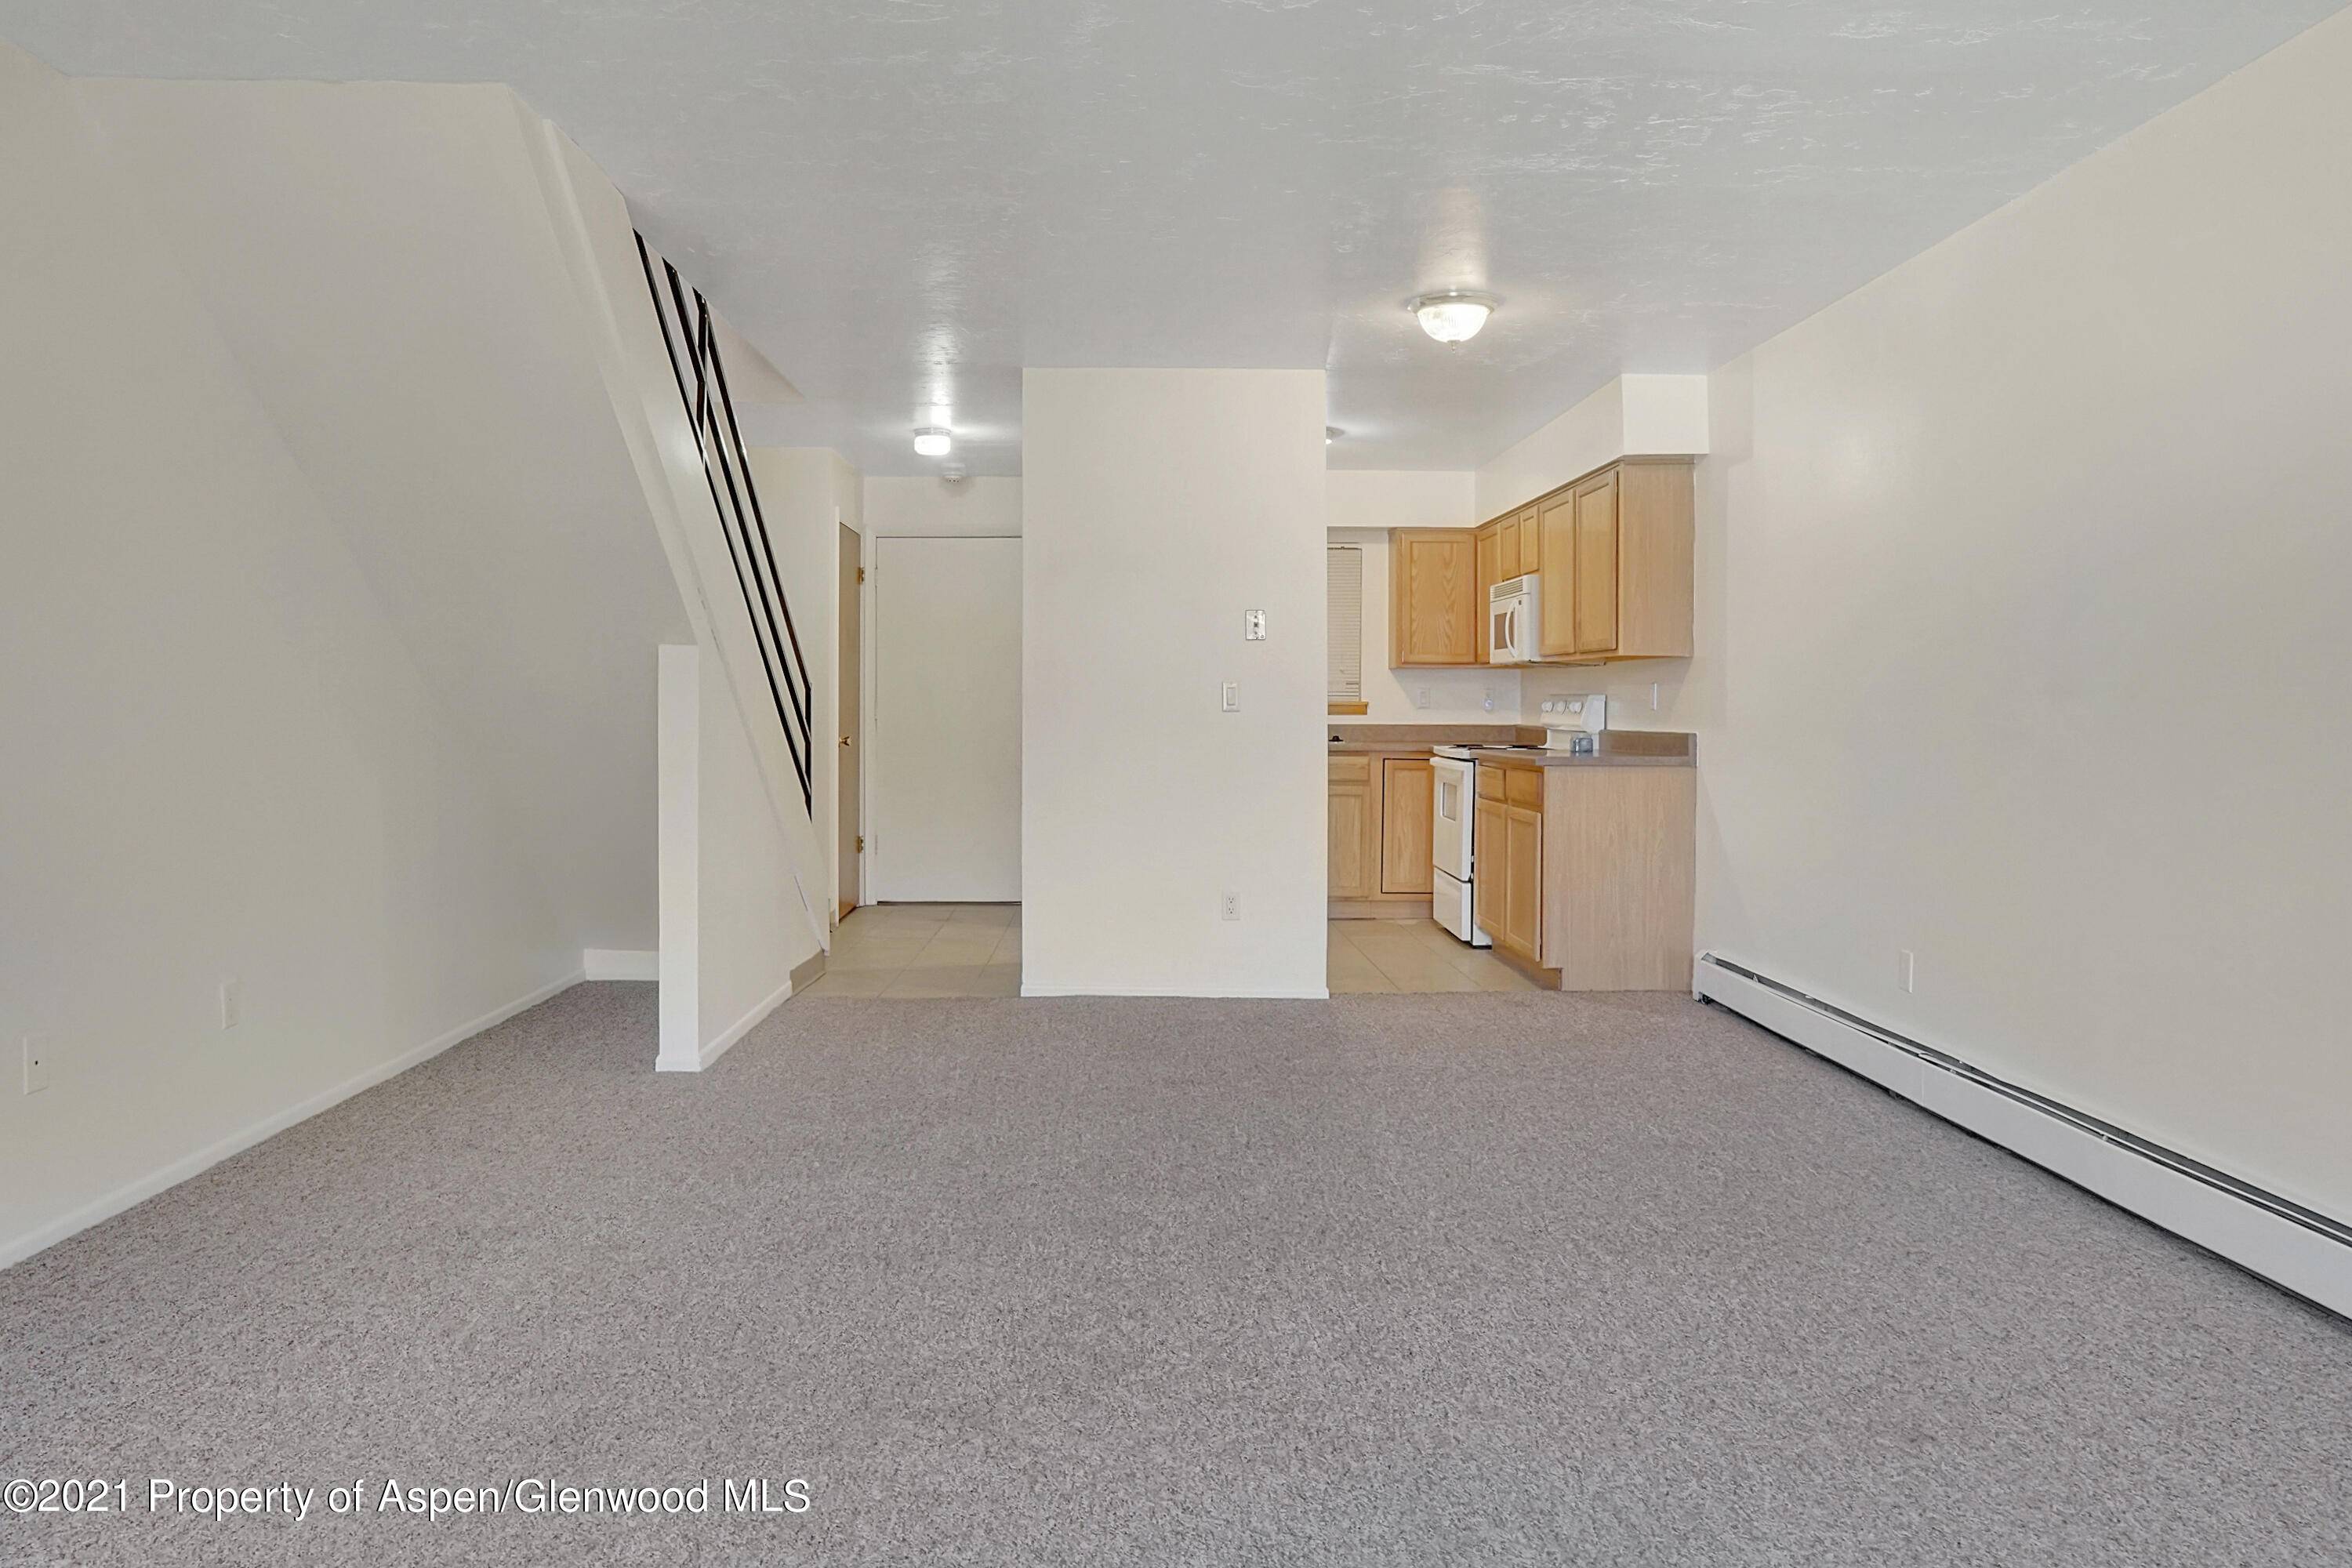 This 879 sq. ft. two story condo is located on the second floor.